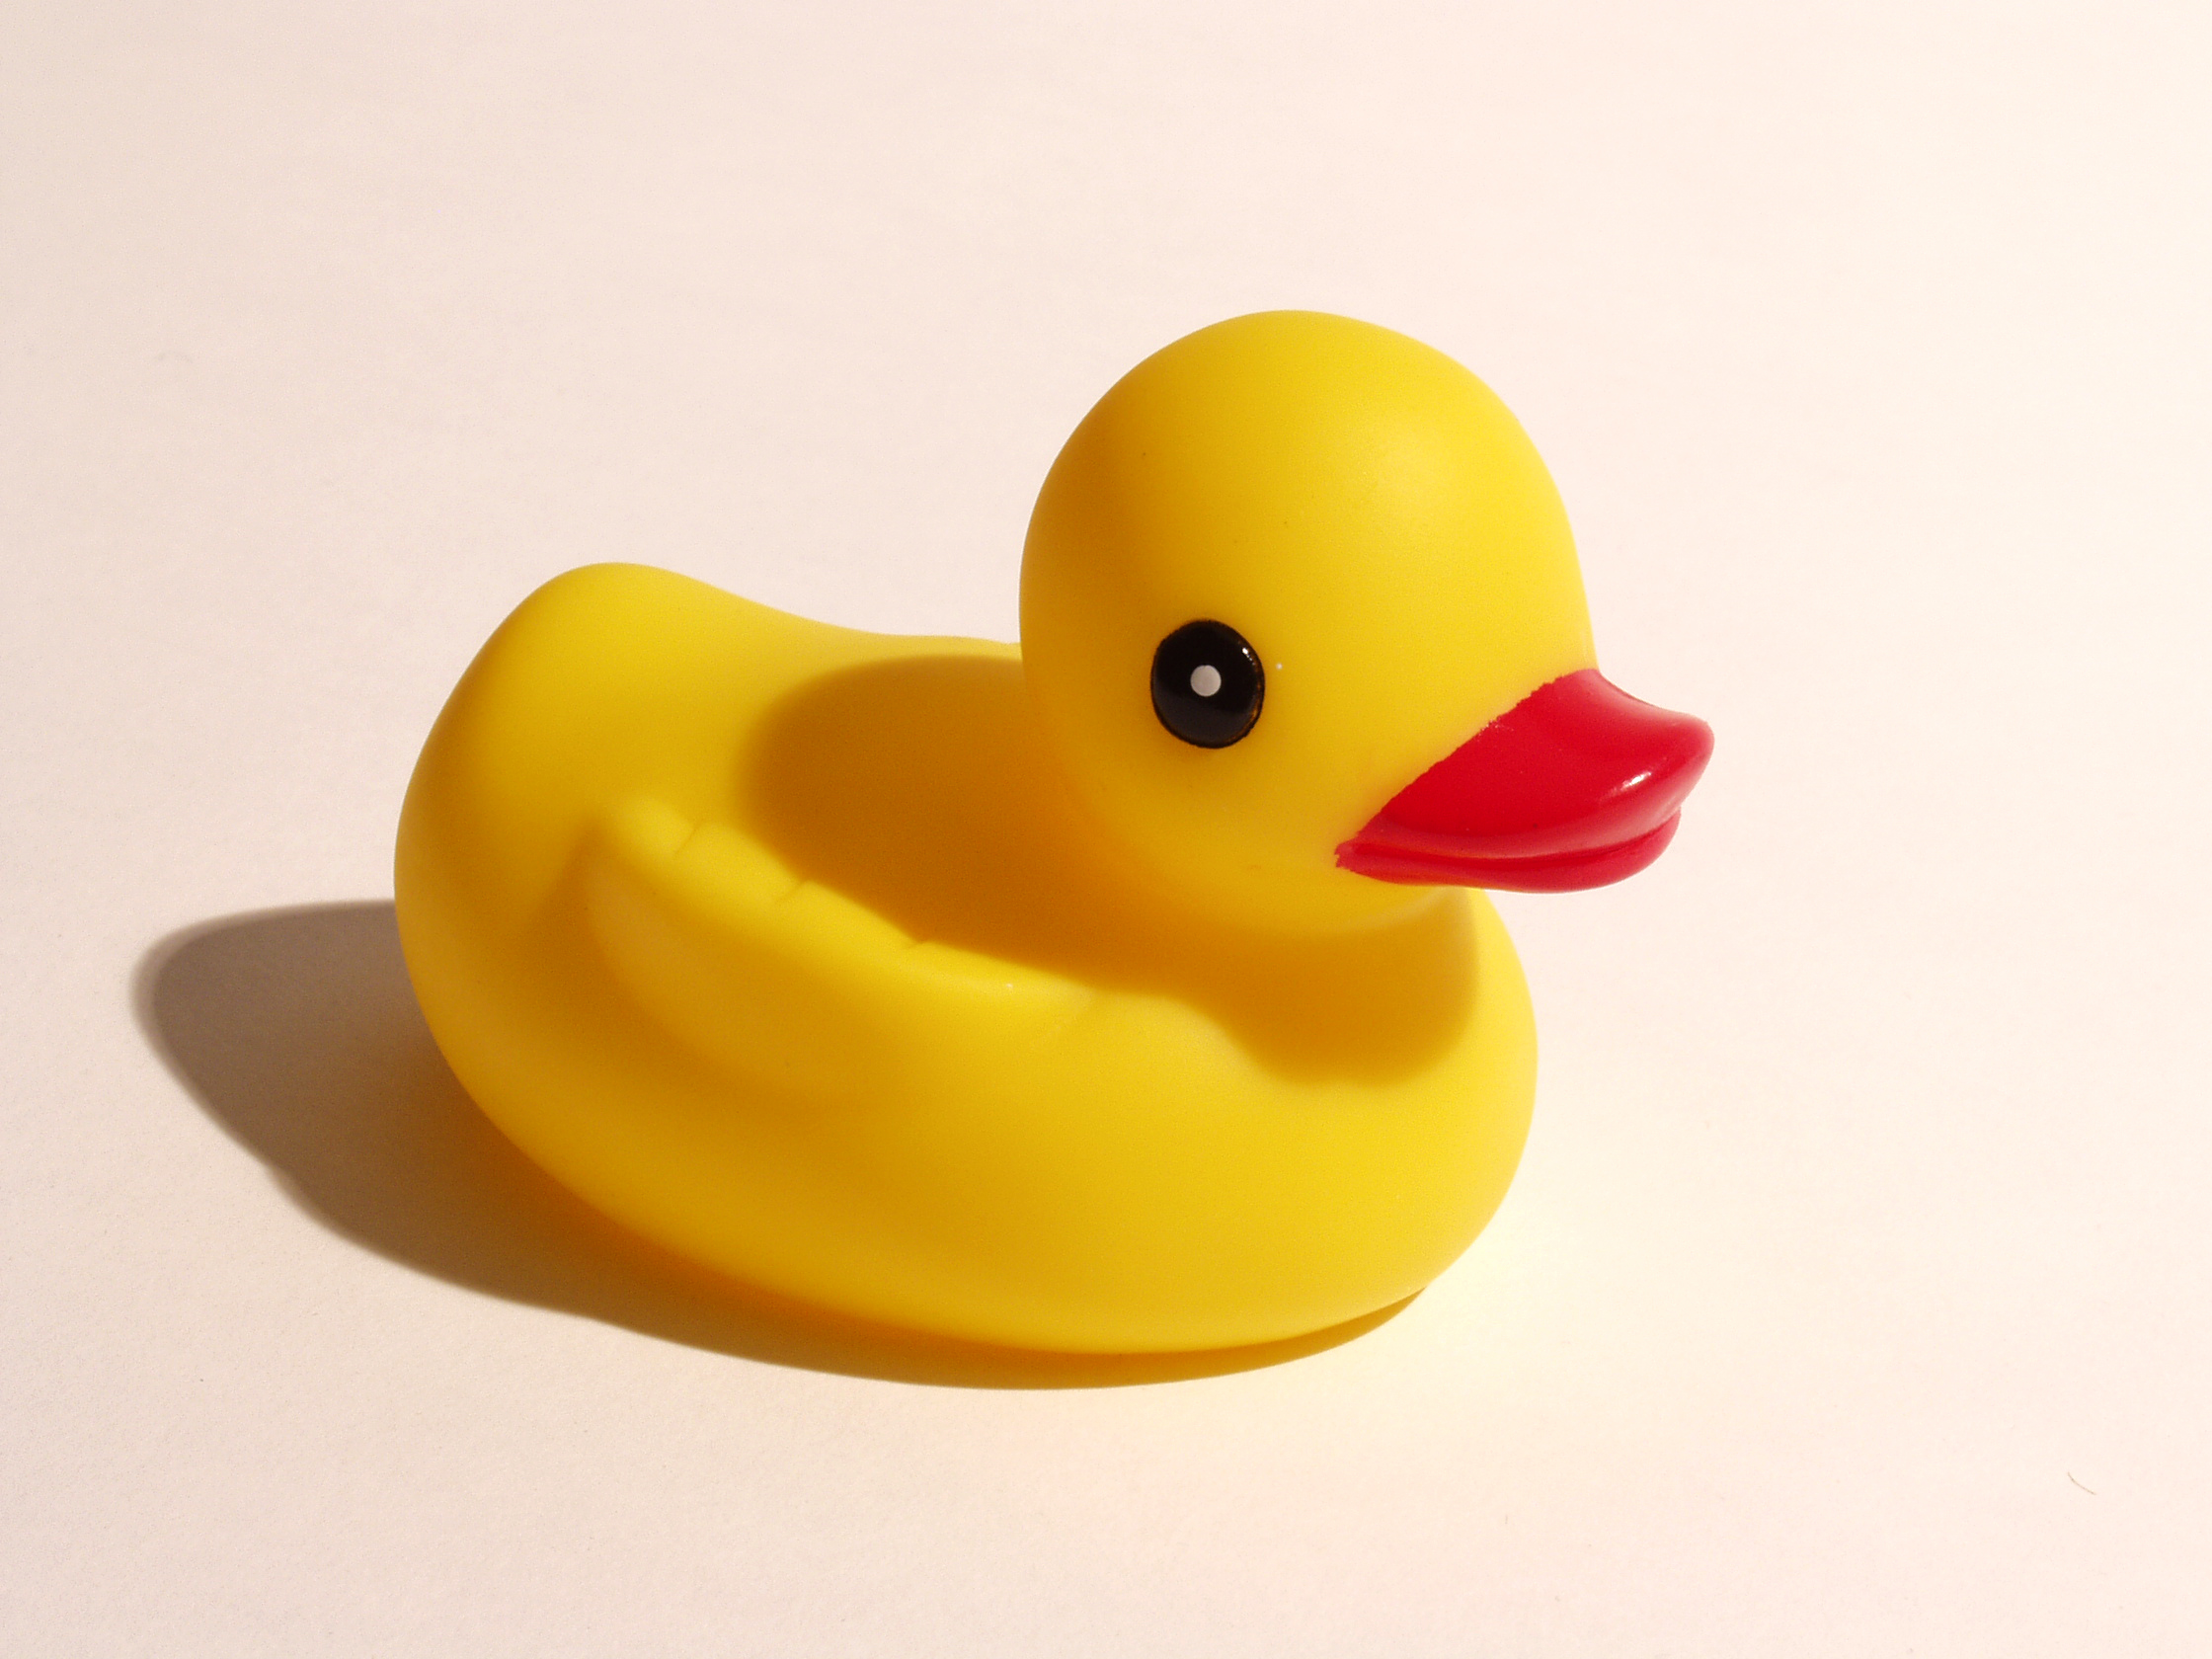 Rubber Ducky Bath Chair Maplestory Inspiration and Design Ideas ...